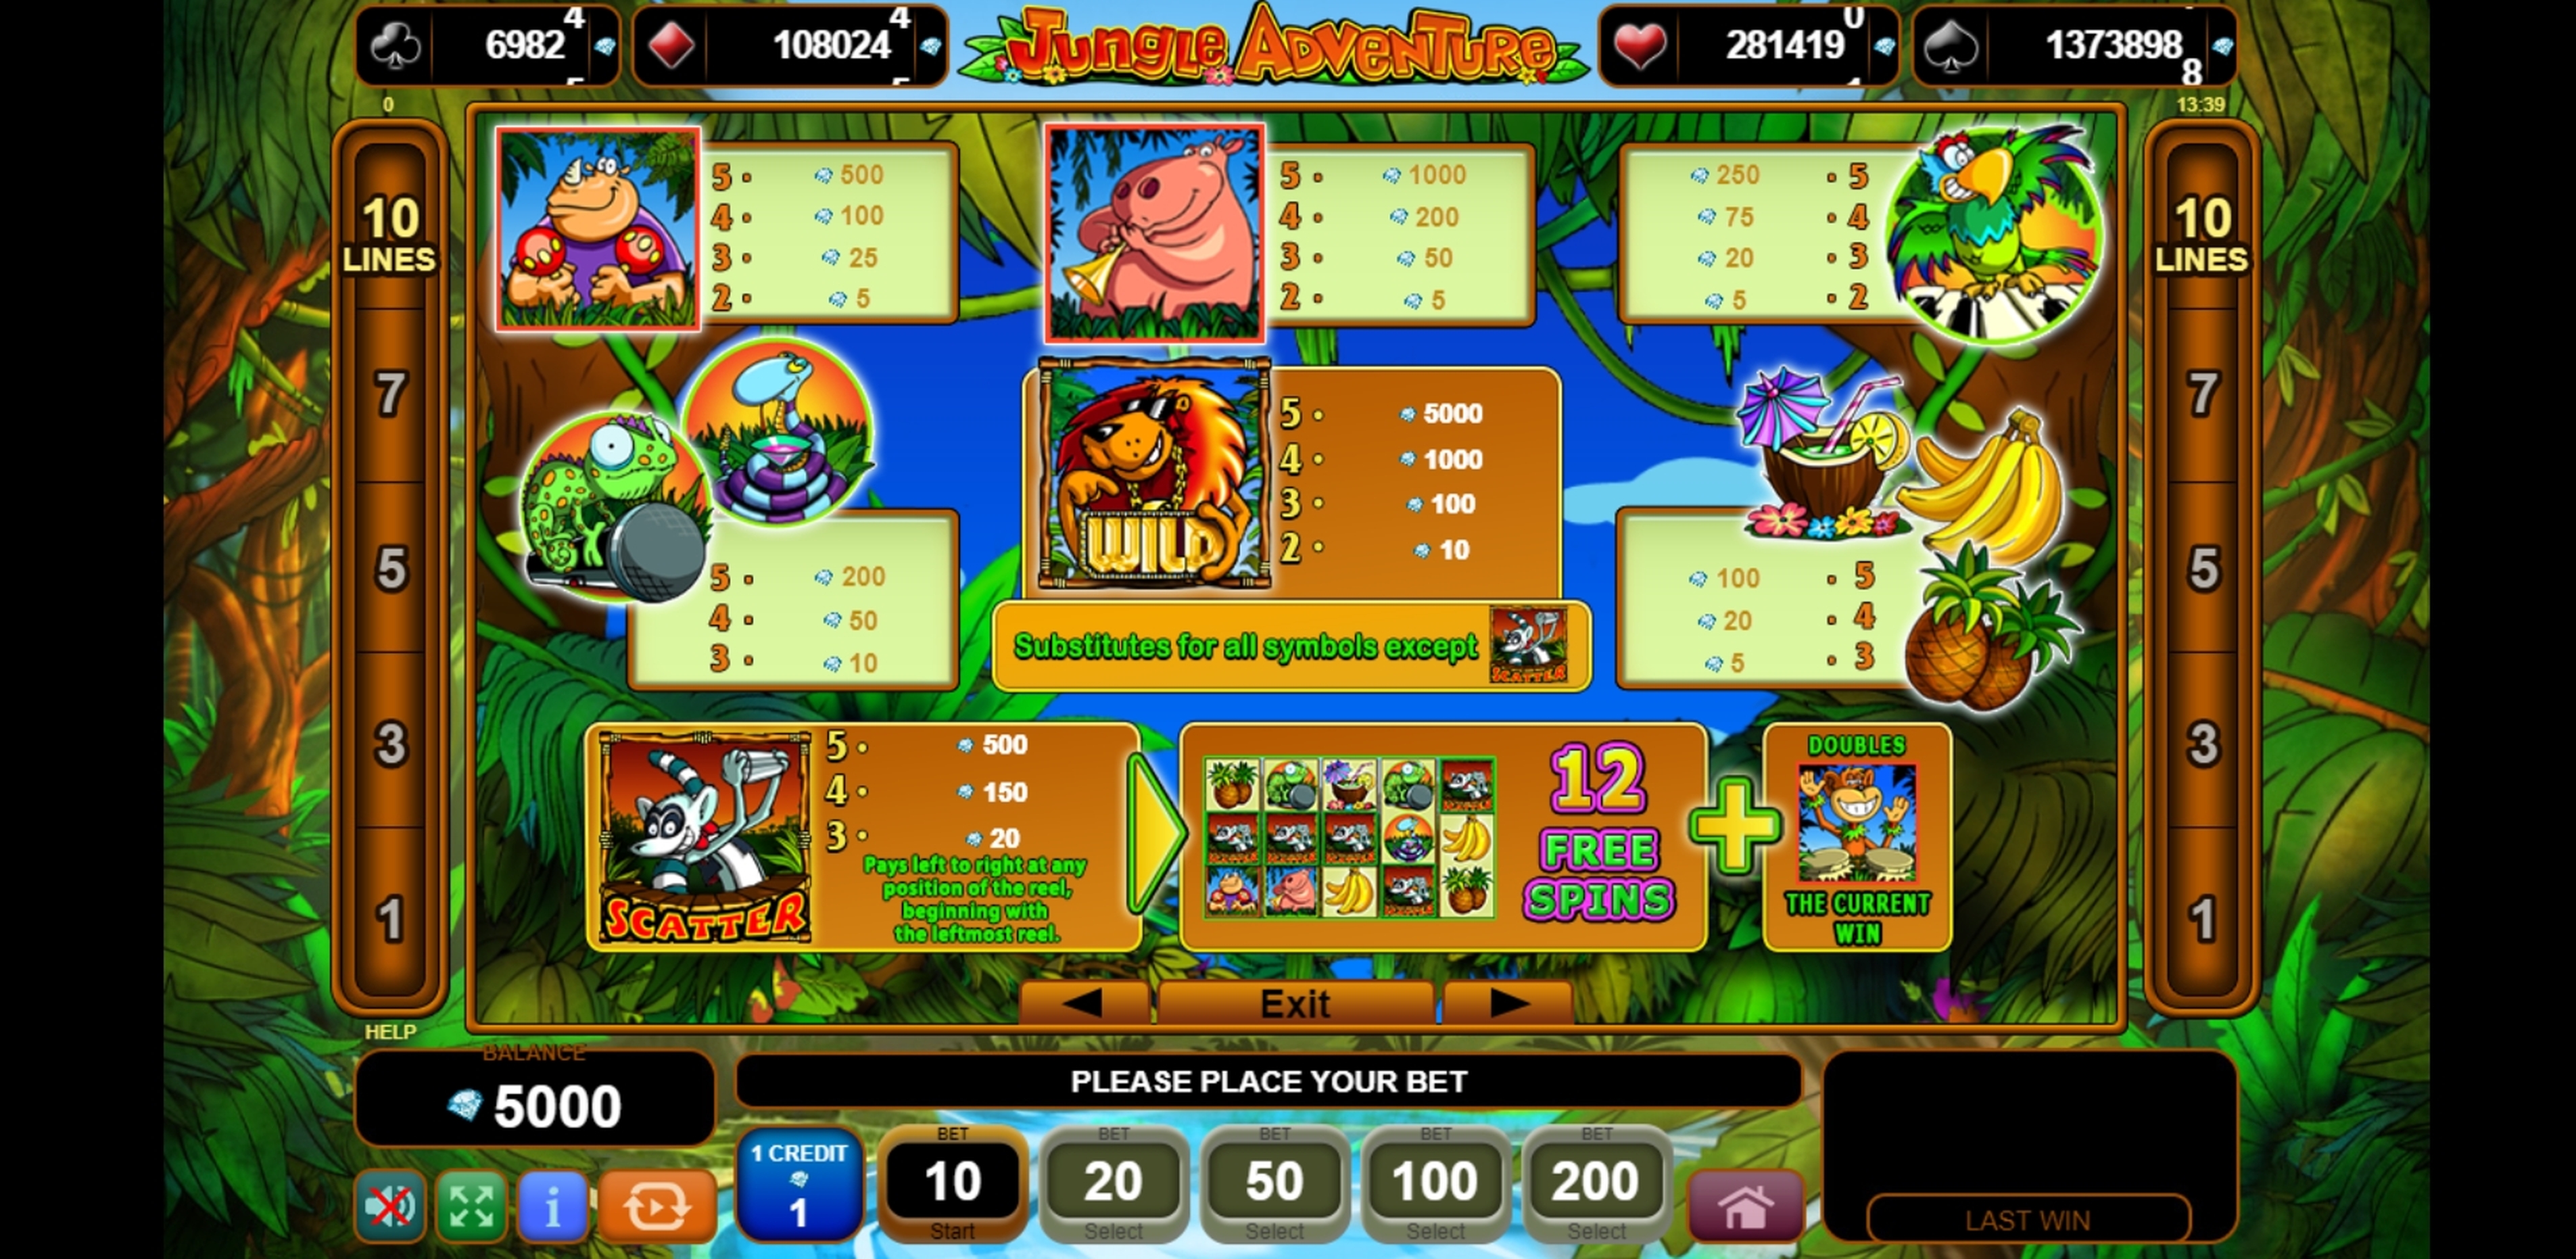 Info of Jungle Adventure Slot Game by EGT